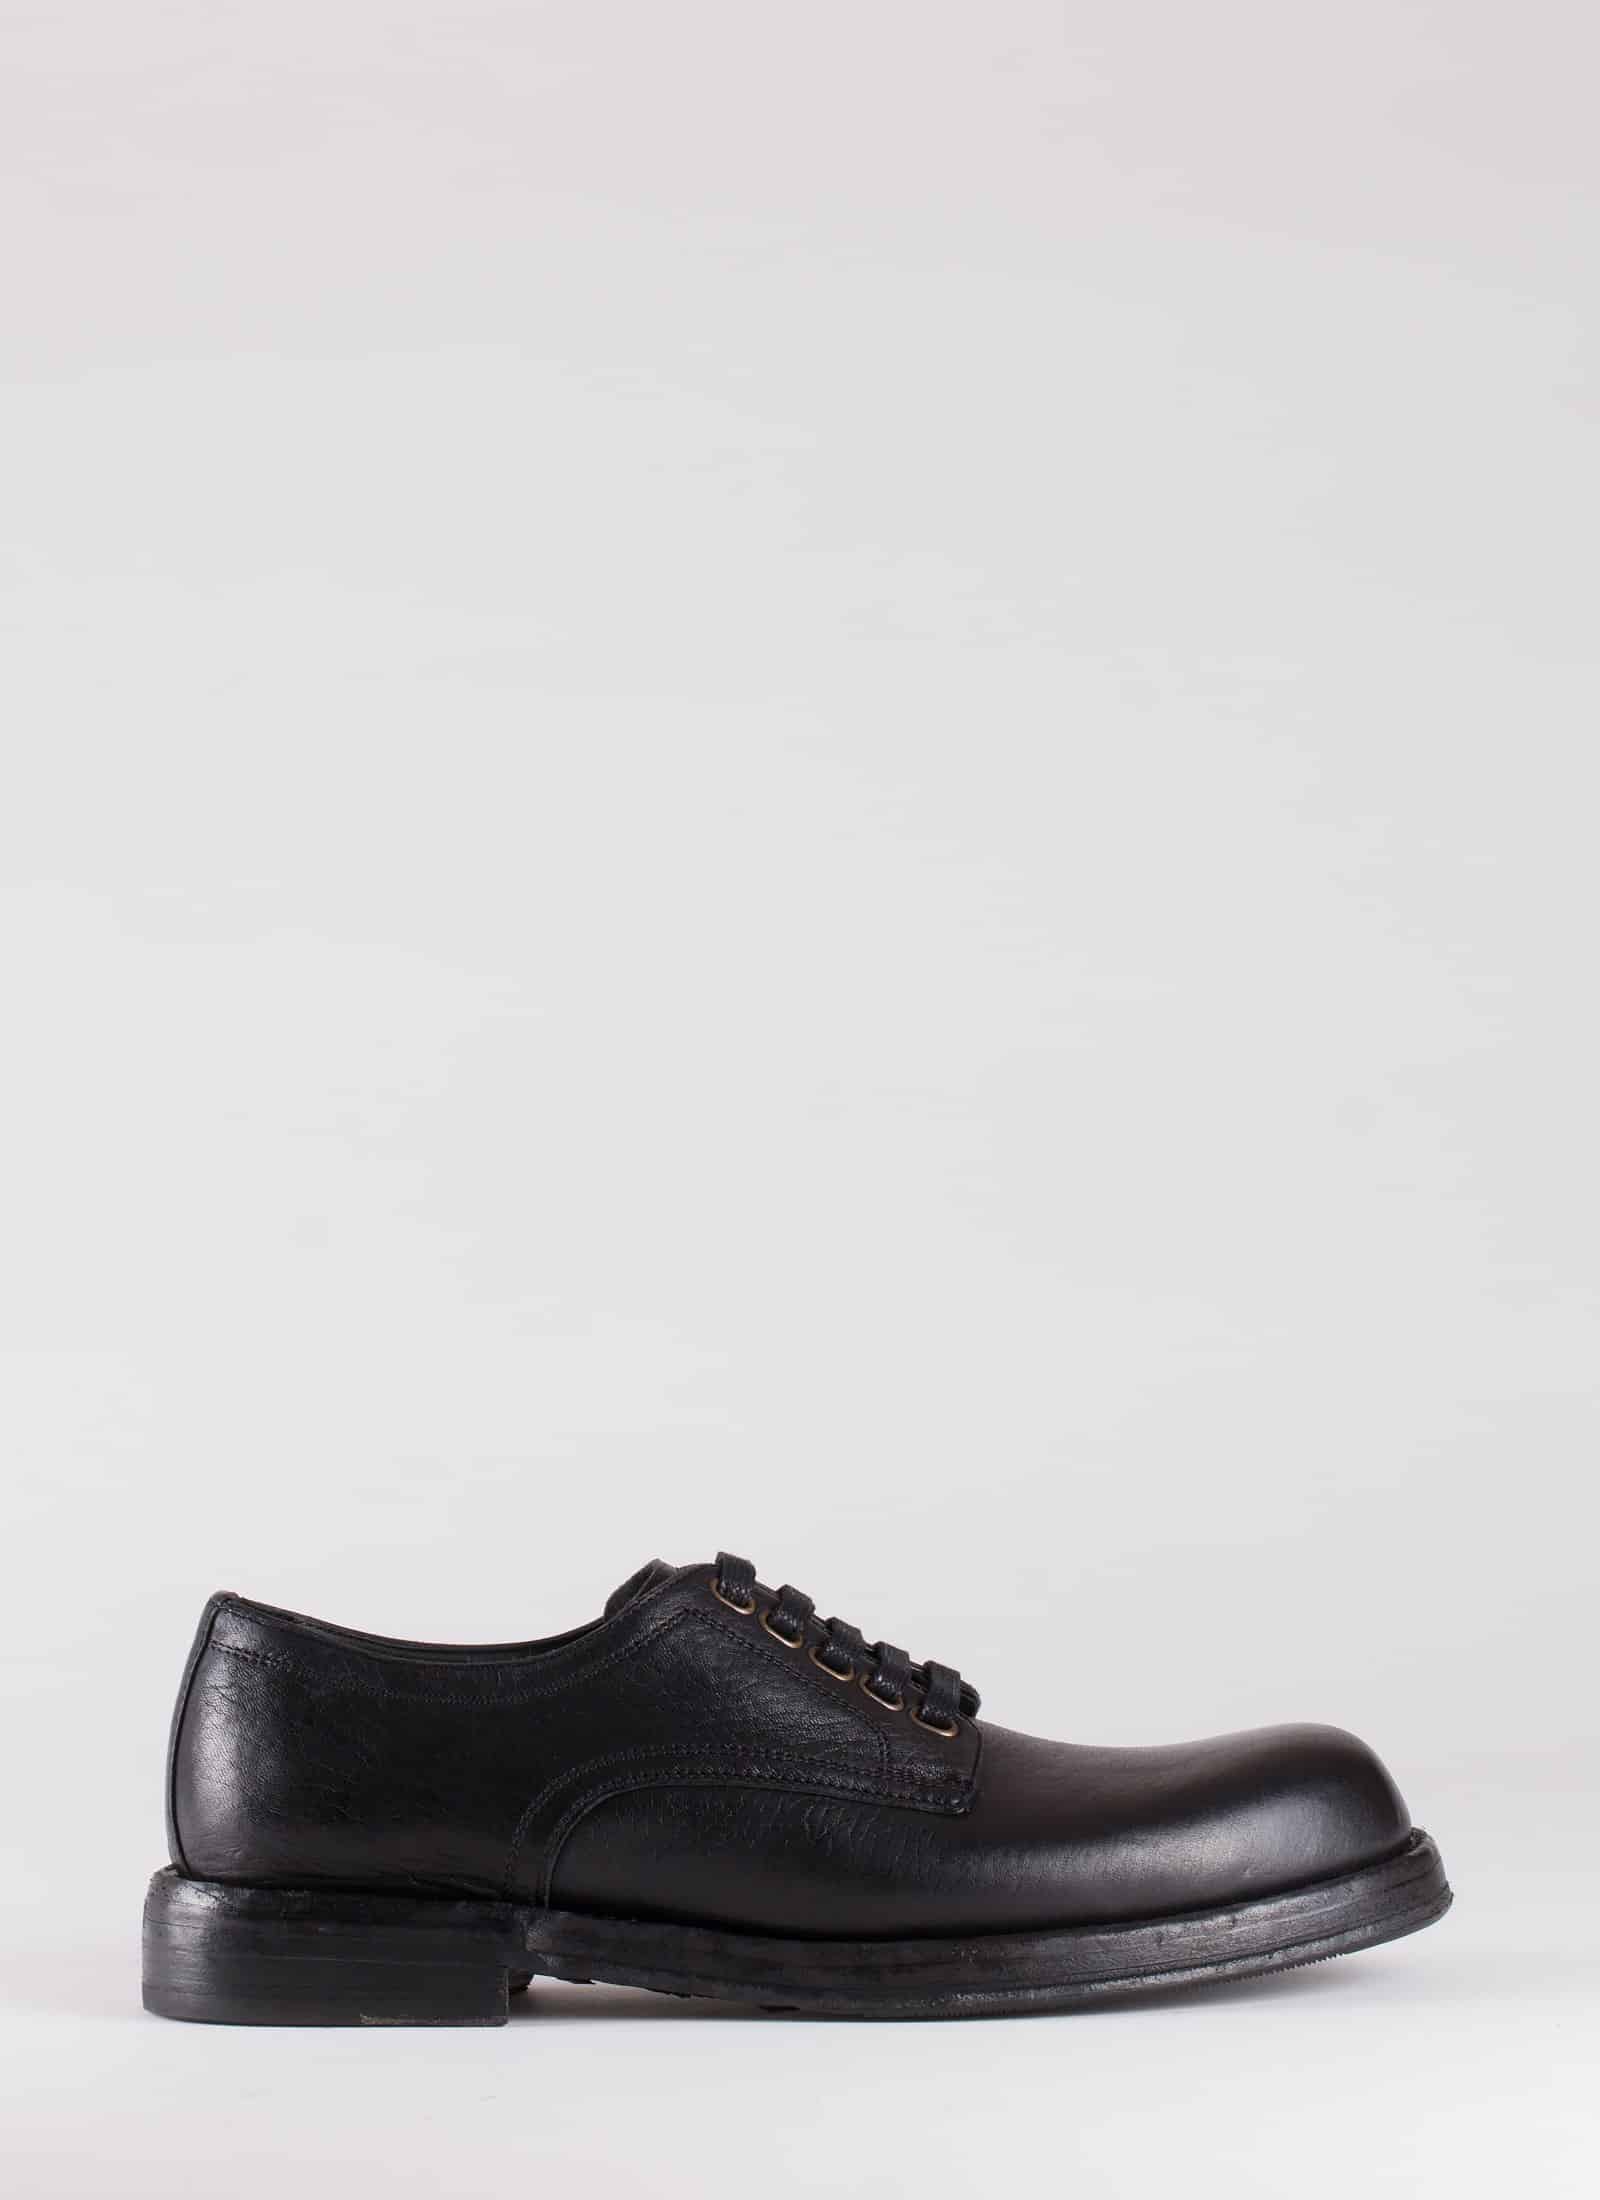 LEATHER SHOES - DOLCE & GABBANA